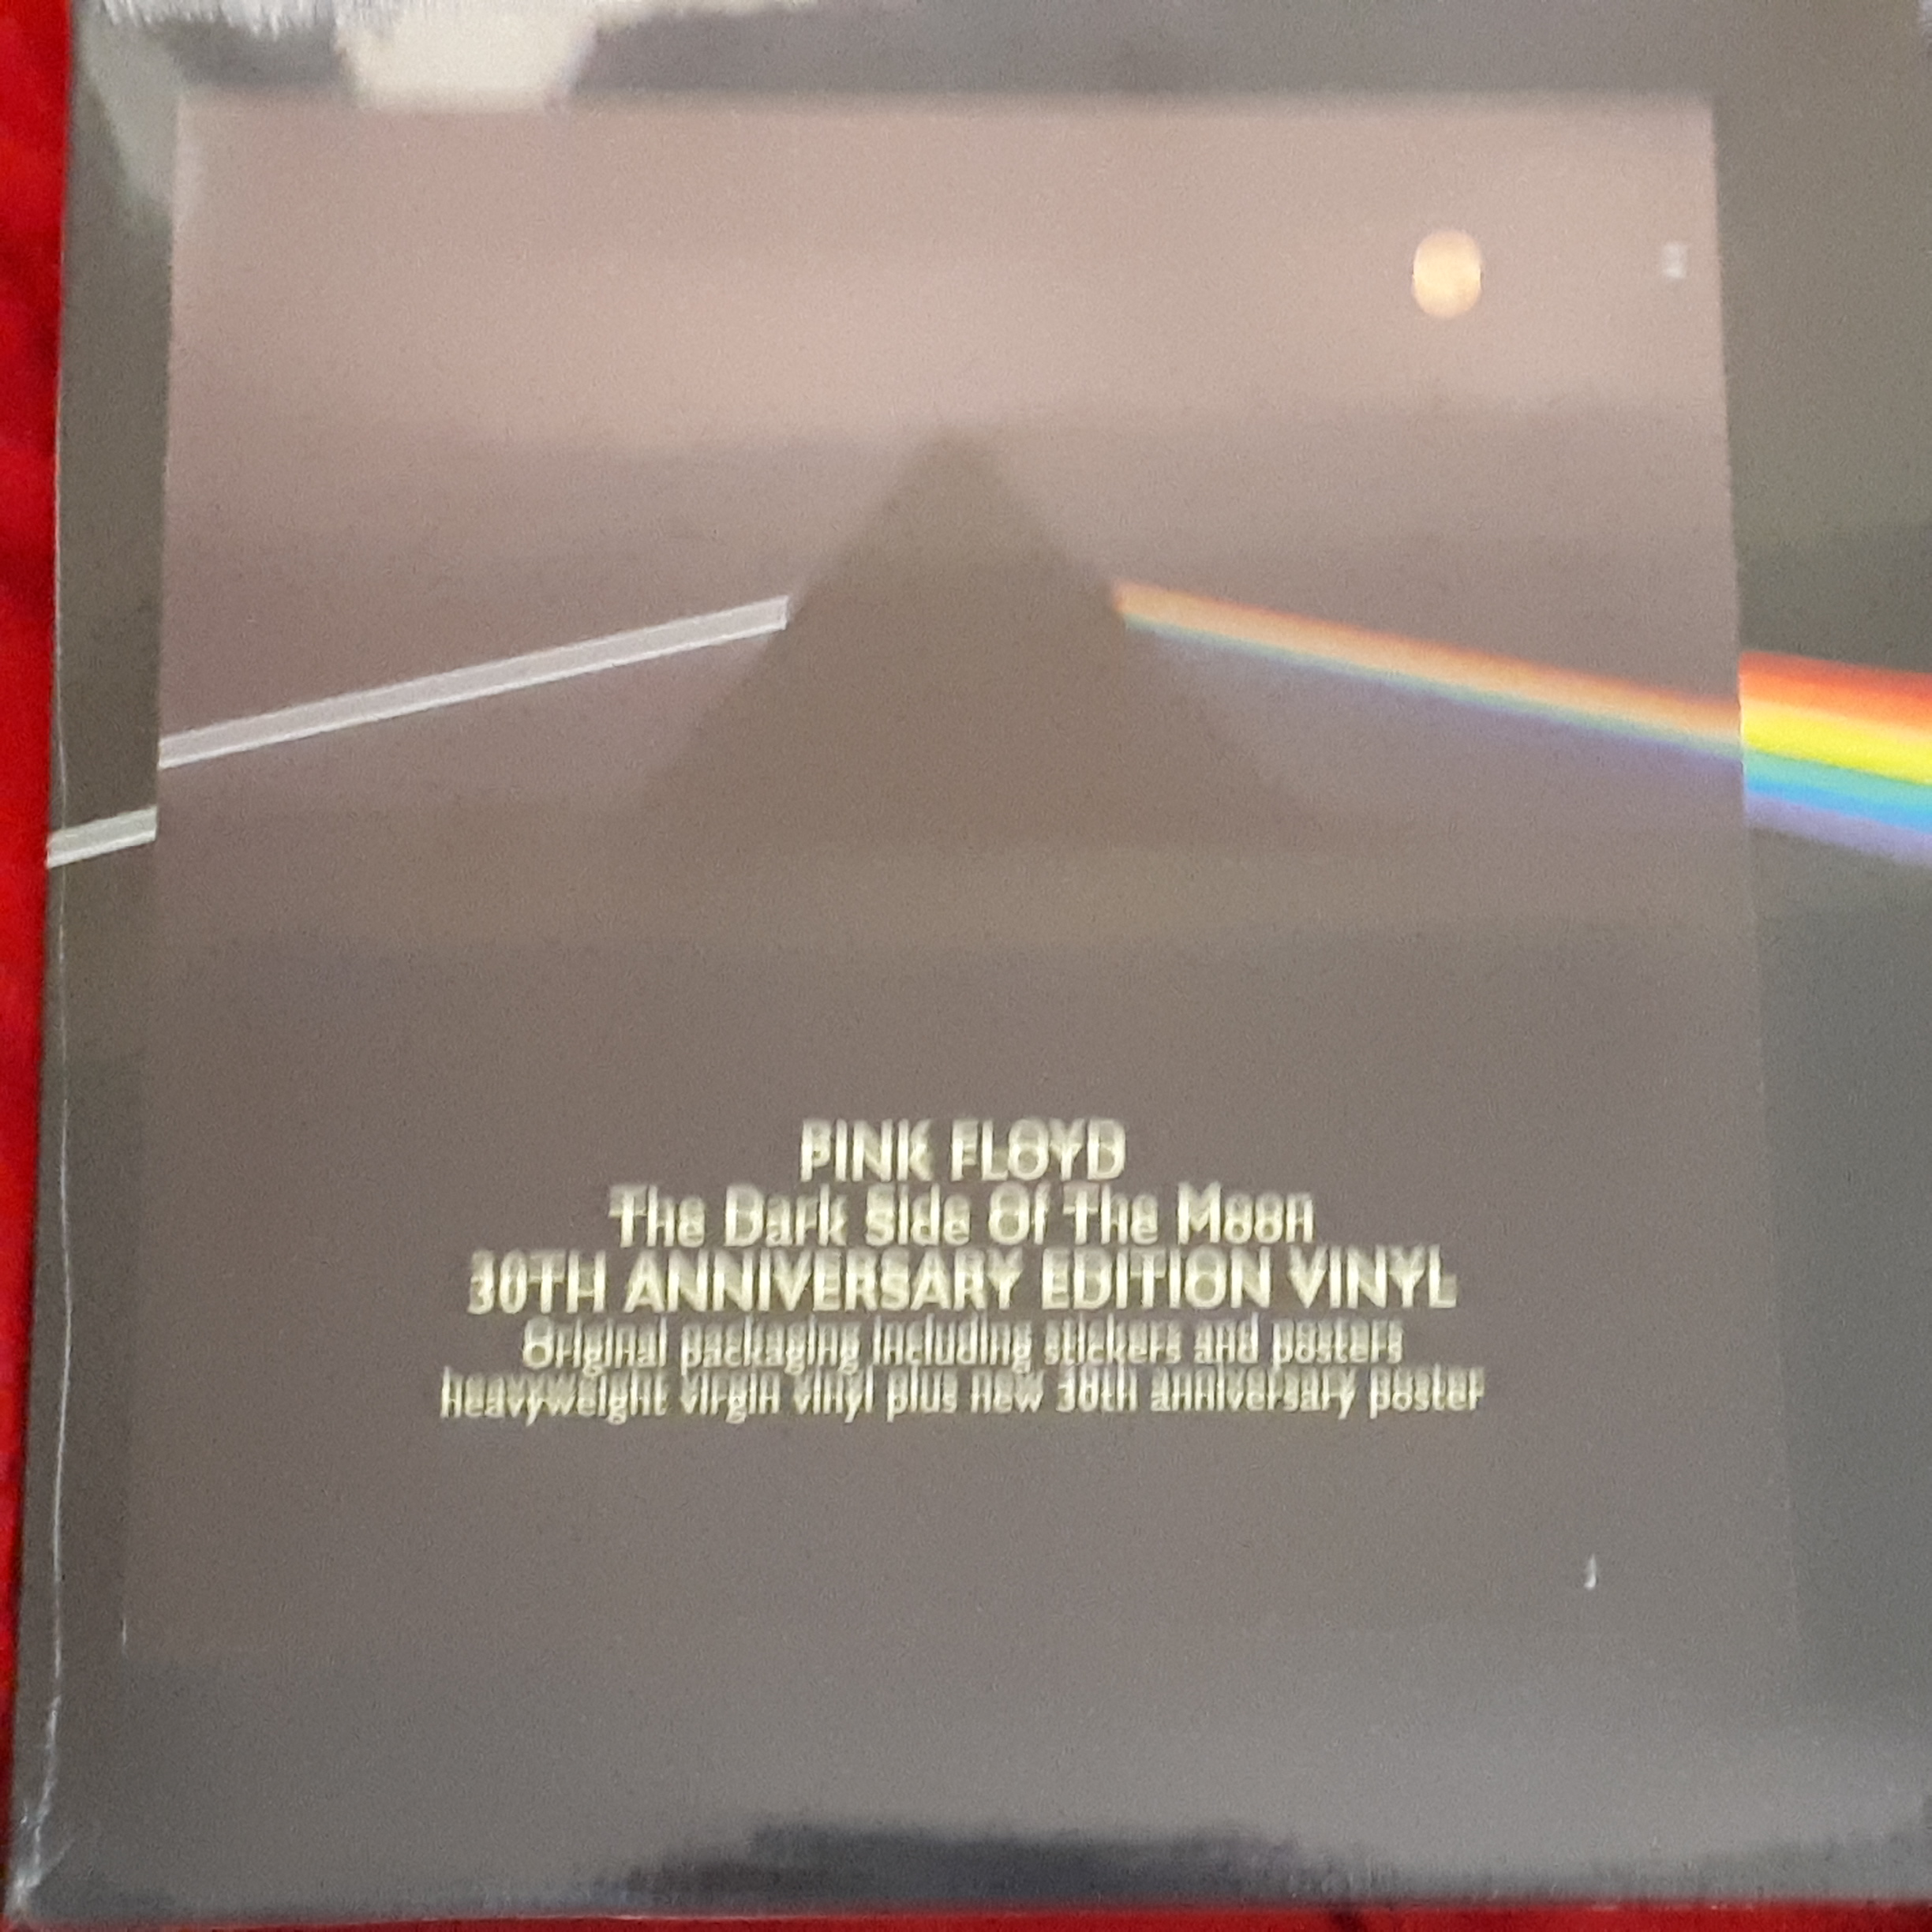 Pink Floyd - The dark side of the moon - 30th anniversary edition